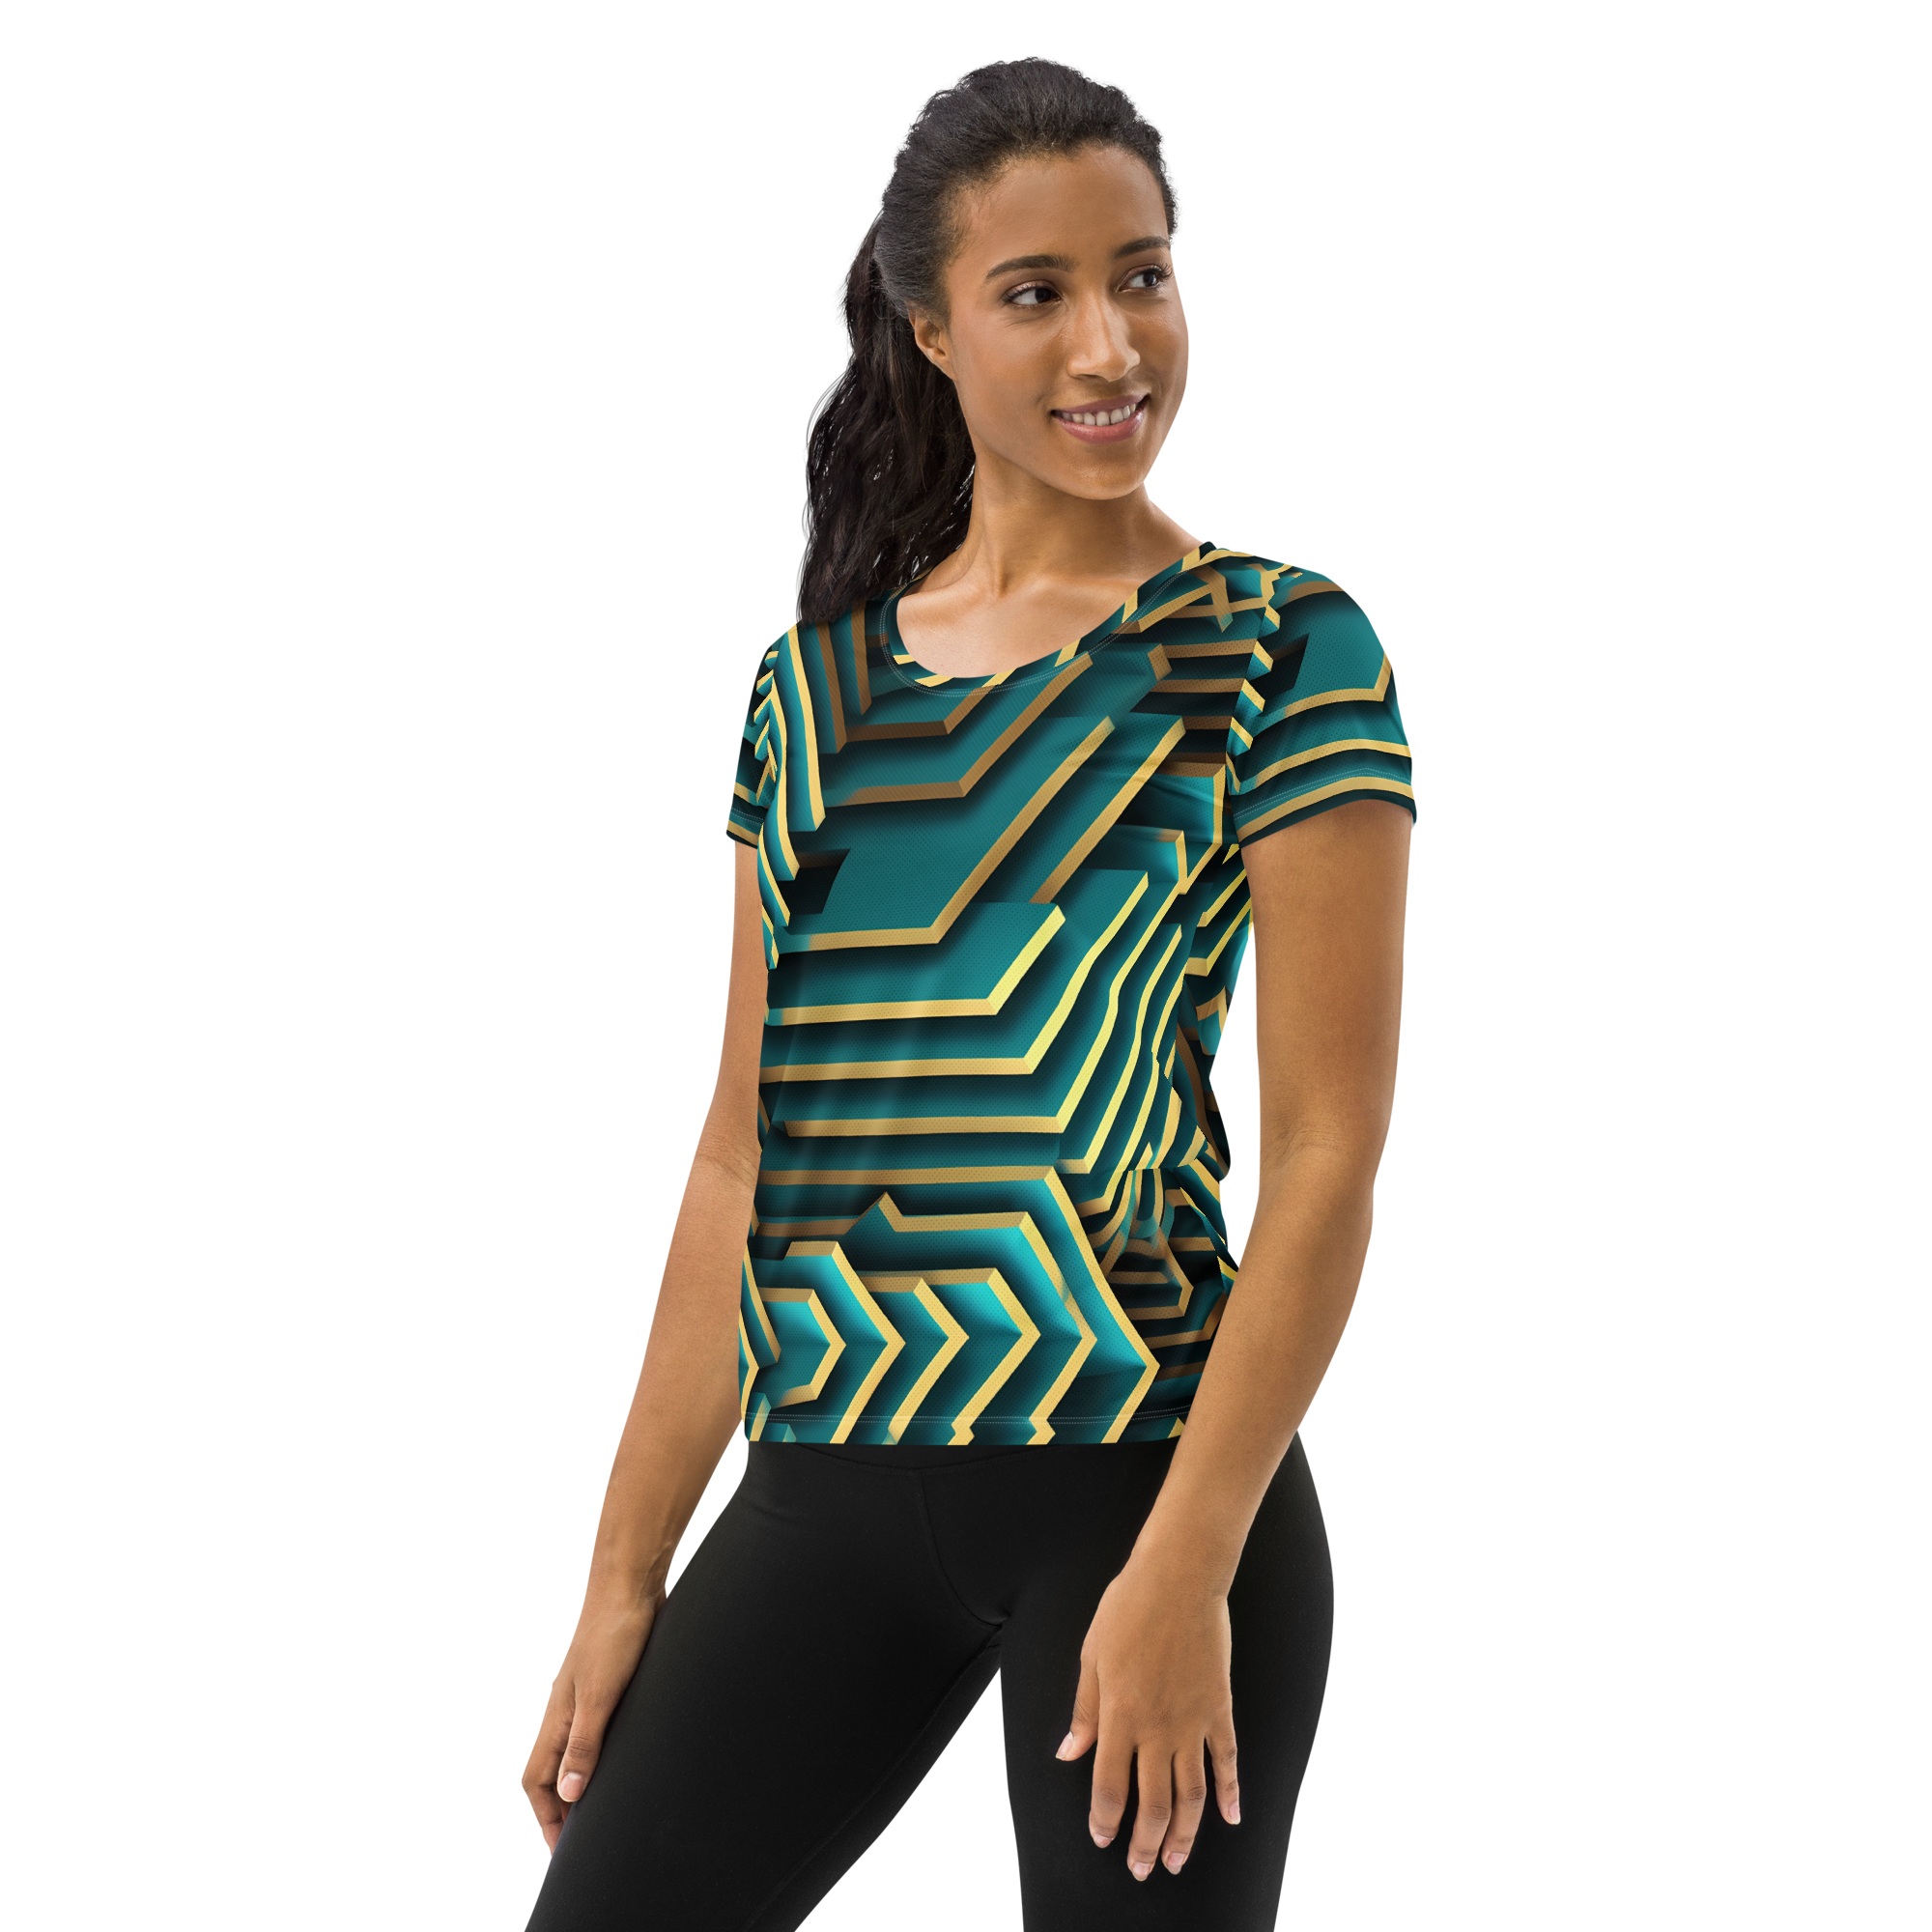 3D Maze Illusion | 3D Patterns | All-Over Print Women's Athletic T-Shirt - #5